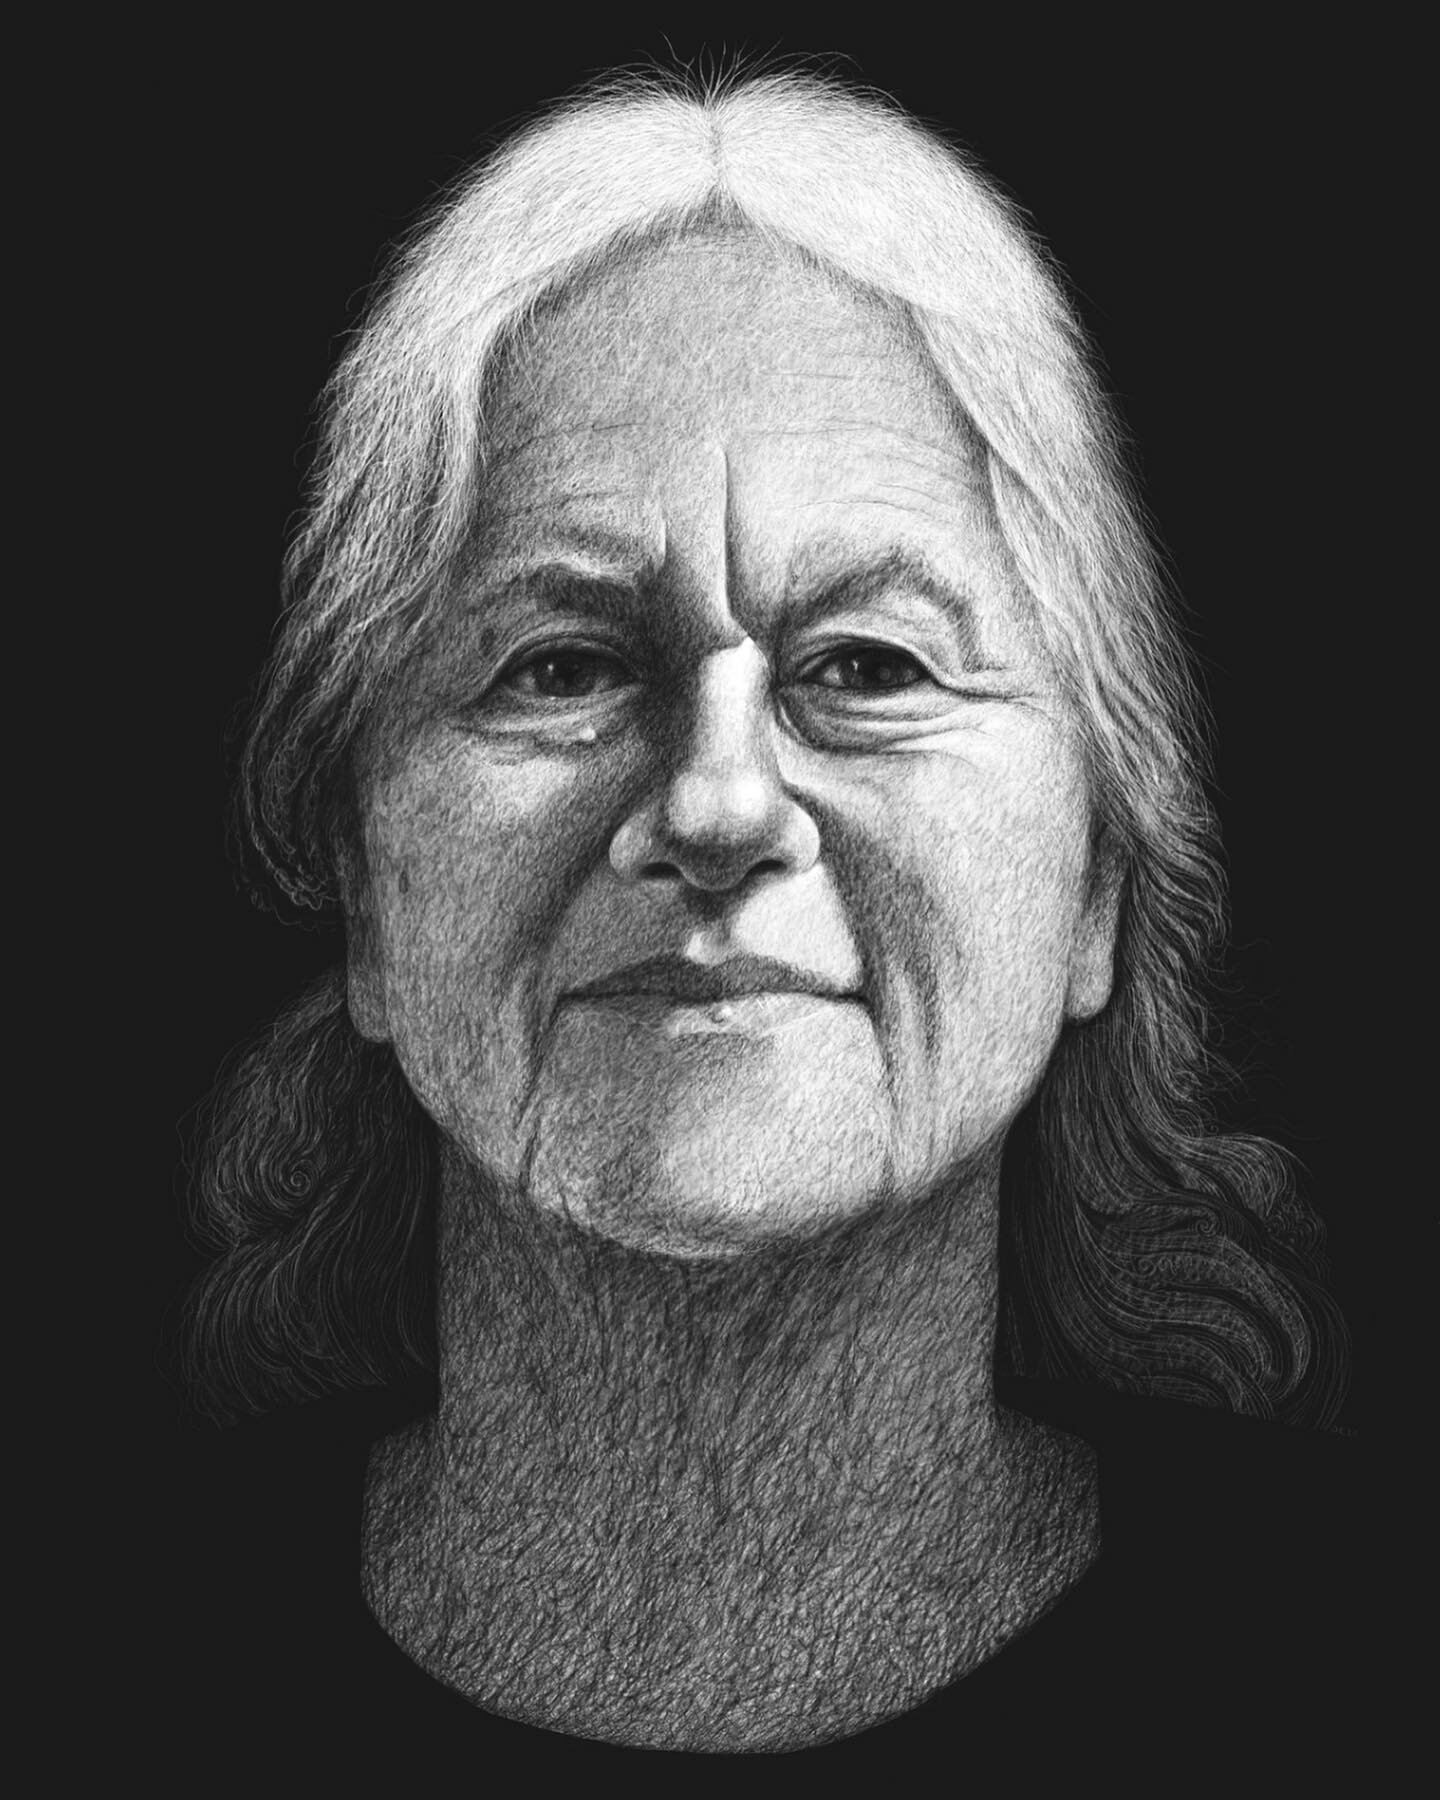 /
I always received
kindness and support from her,
my sweet aunt, Carol.
/
#dk_drawing_series 
#dk_portrait_series 
/
#aunt #drawing #portrait #79years #restinpeace #haiku